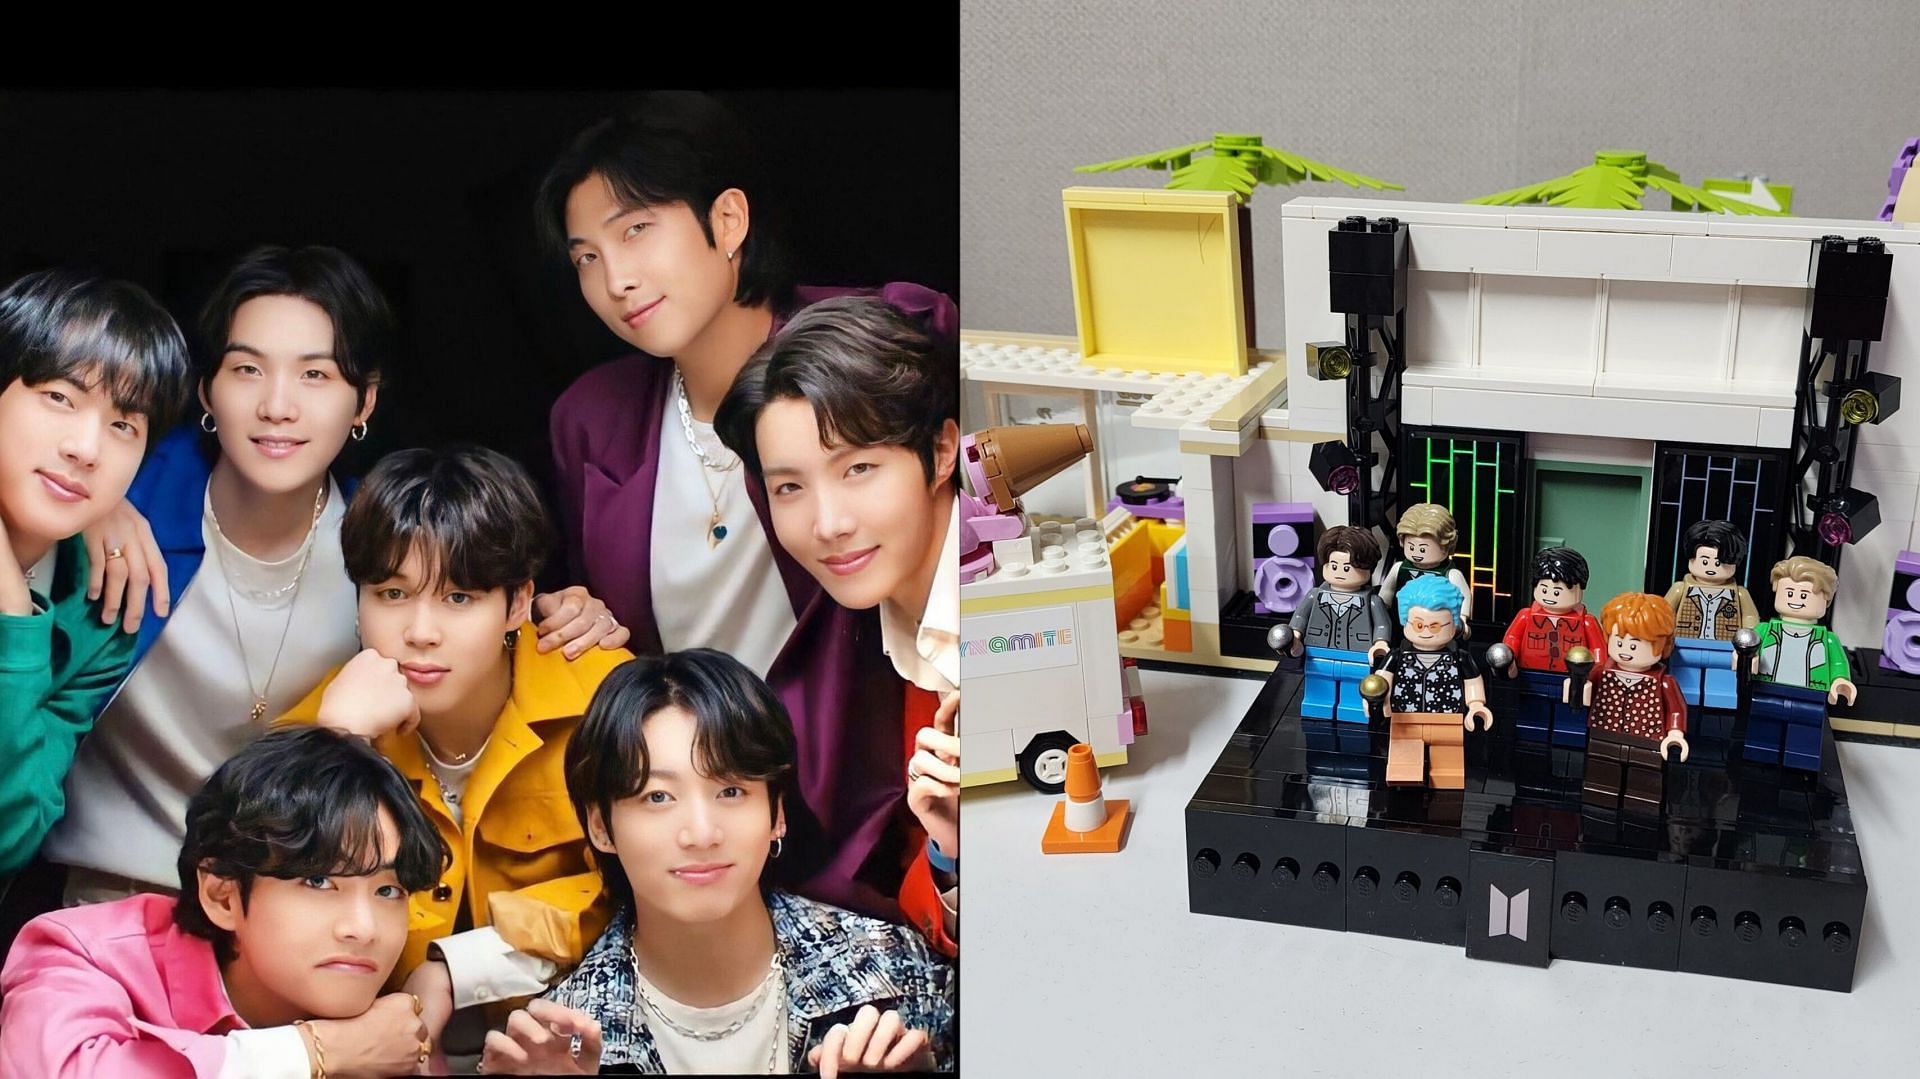 Featuring BTS AND BTS Dynamite Lego (Image via Bighit Entertainment and @stillwithmochi Twitter)